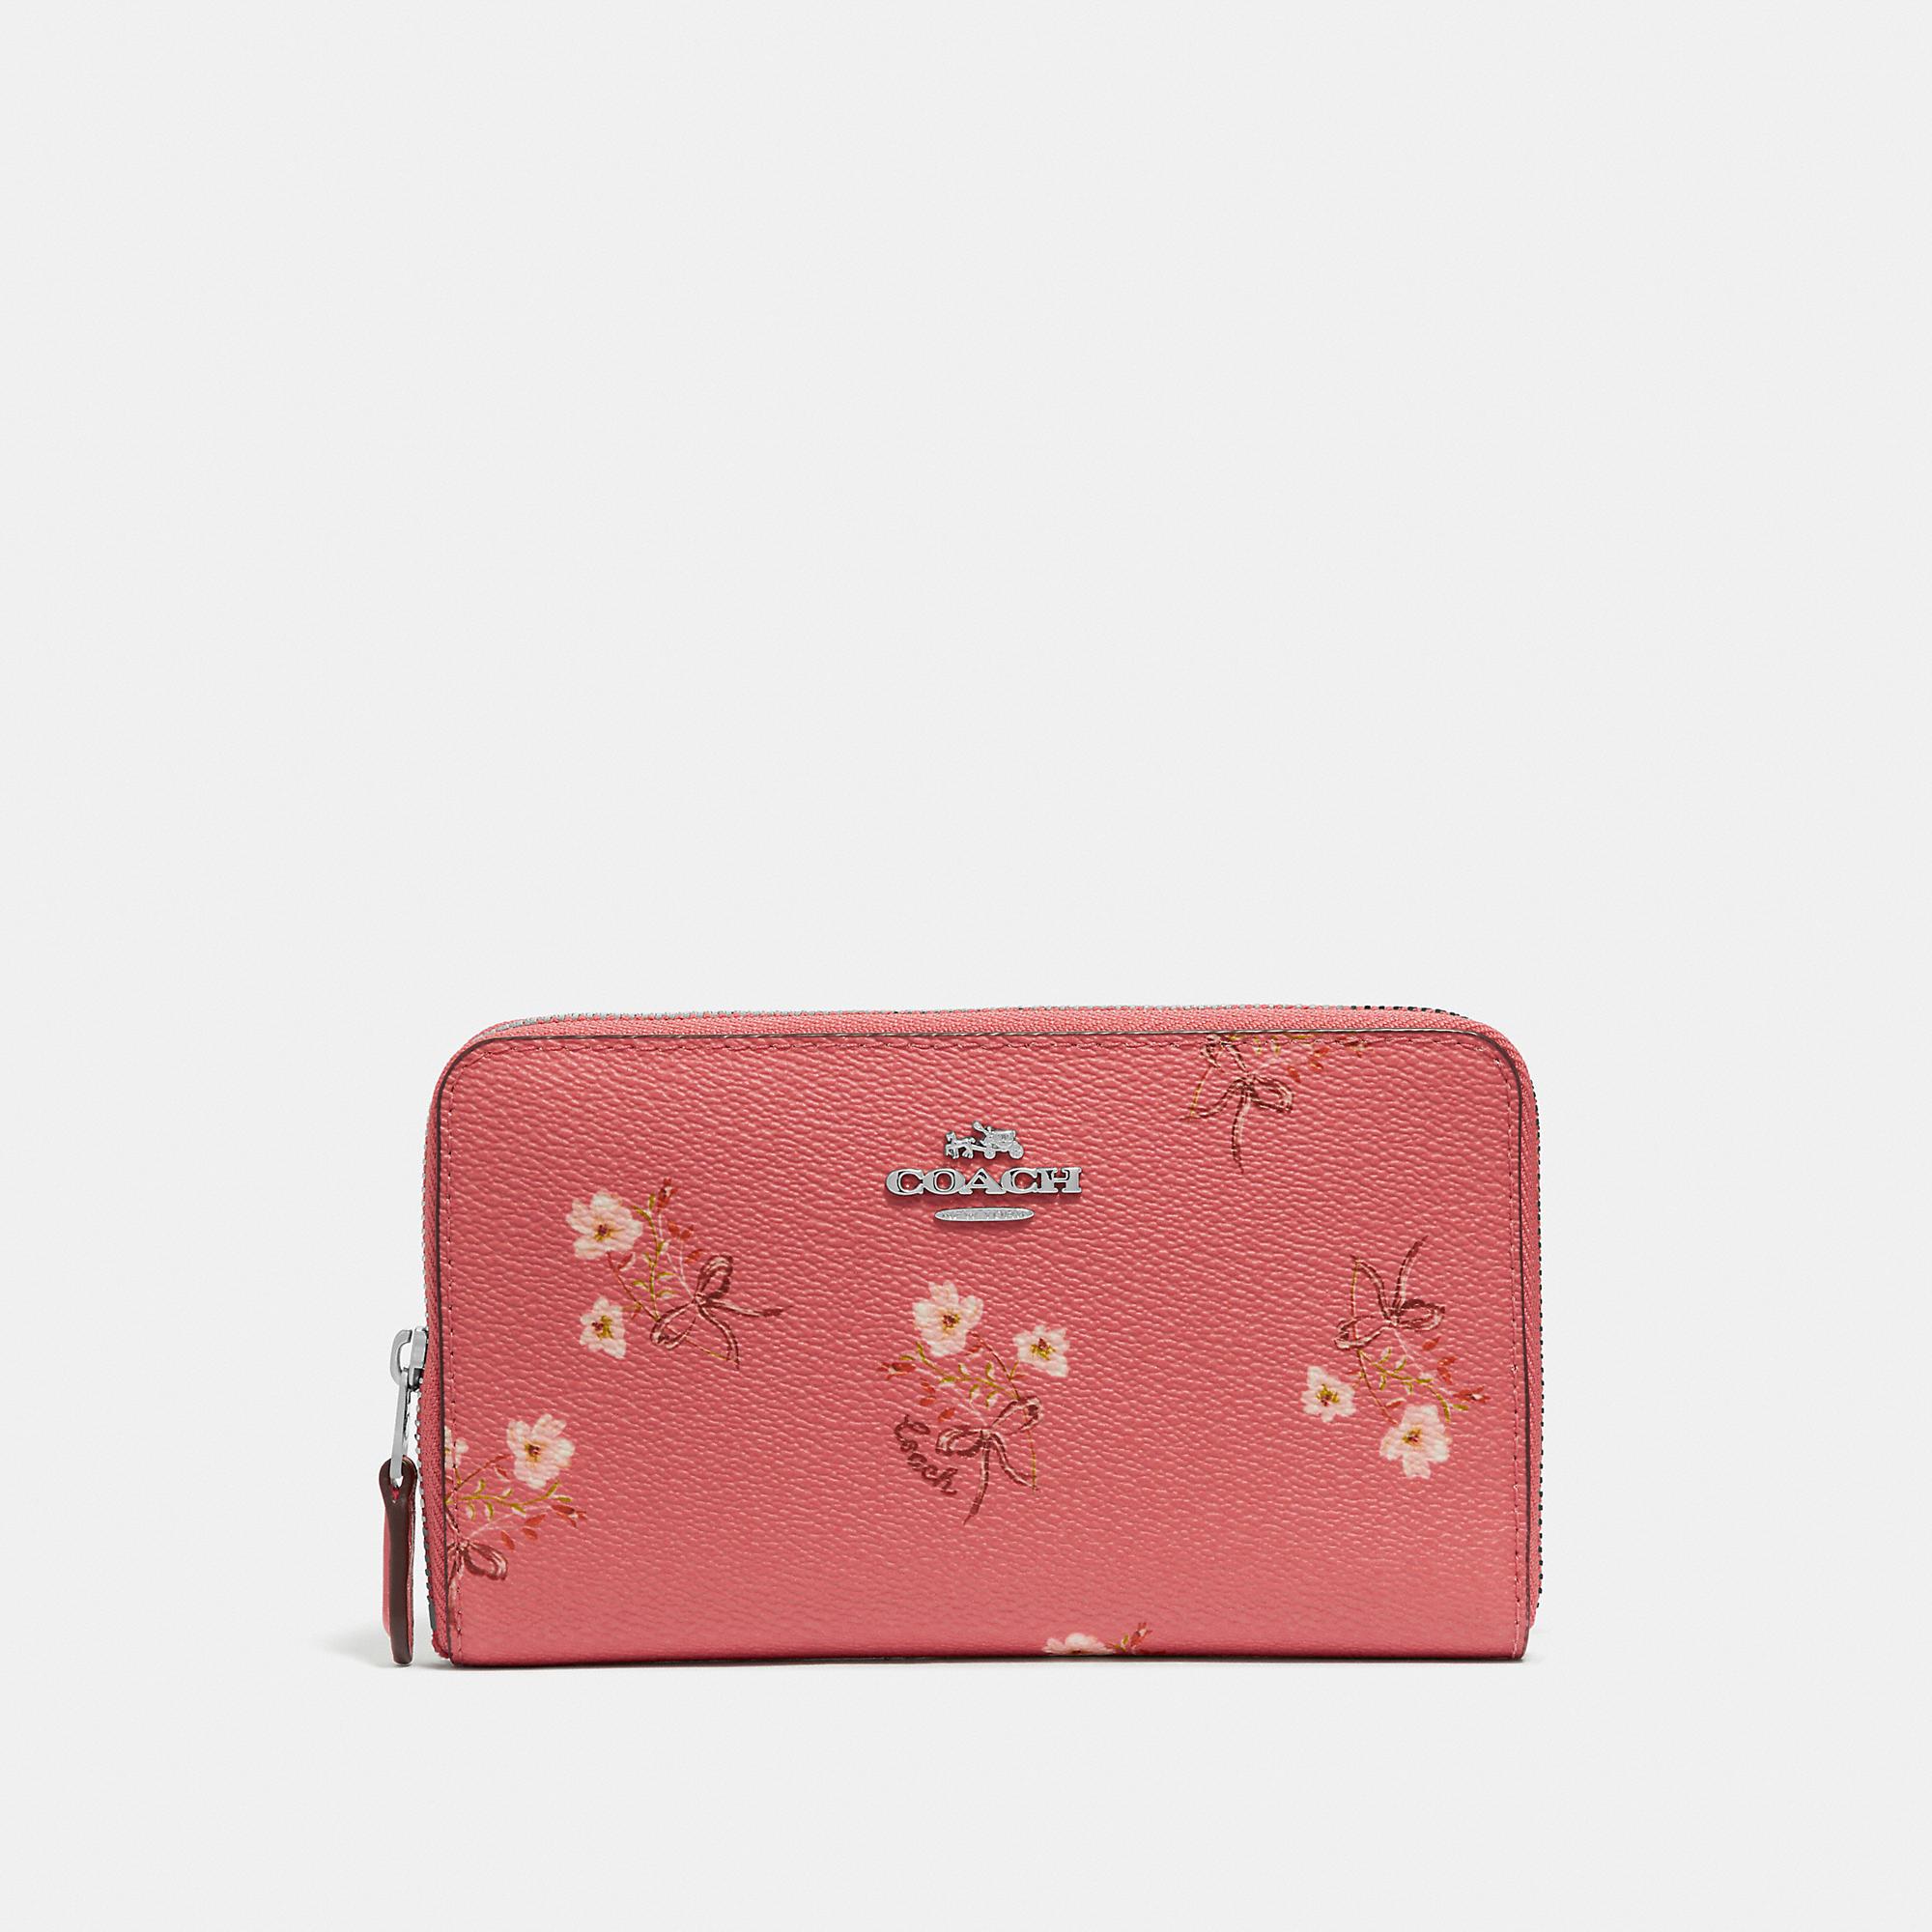 COACH Medium Zip Around Wallet With Floral Bow Print in Pink - Lyst